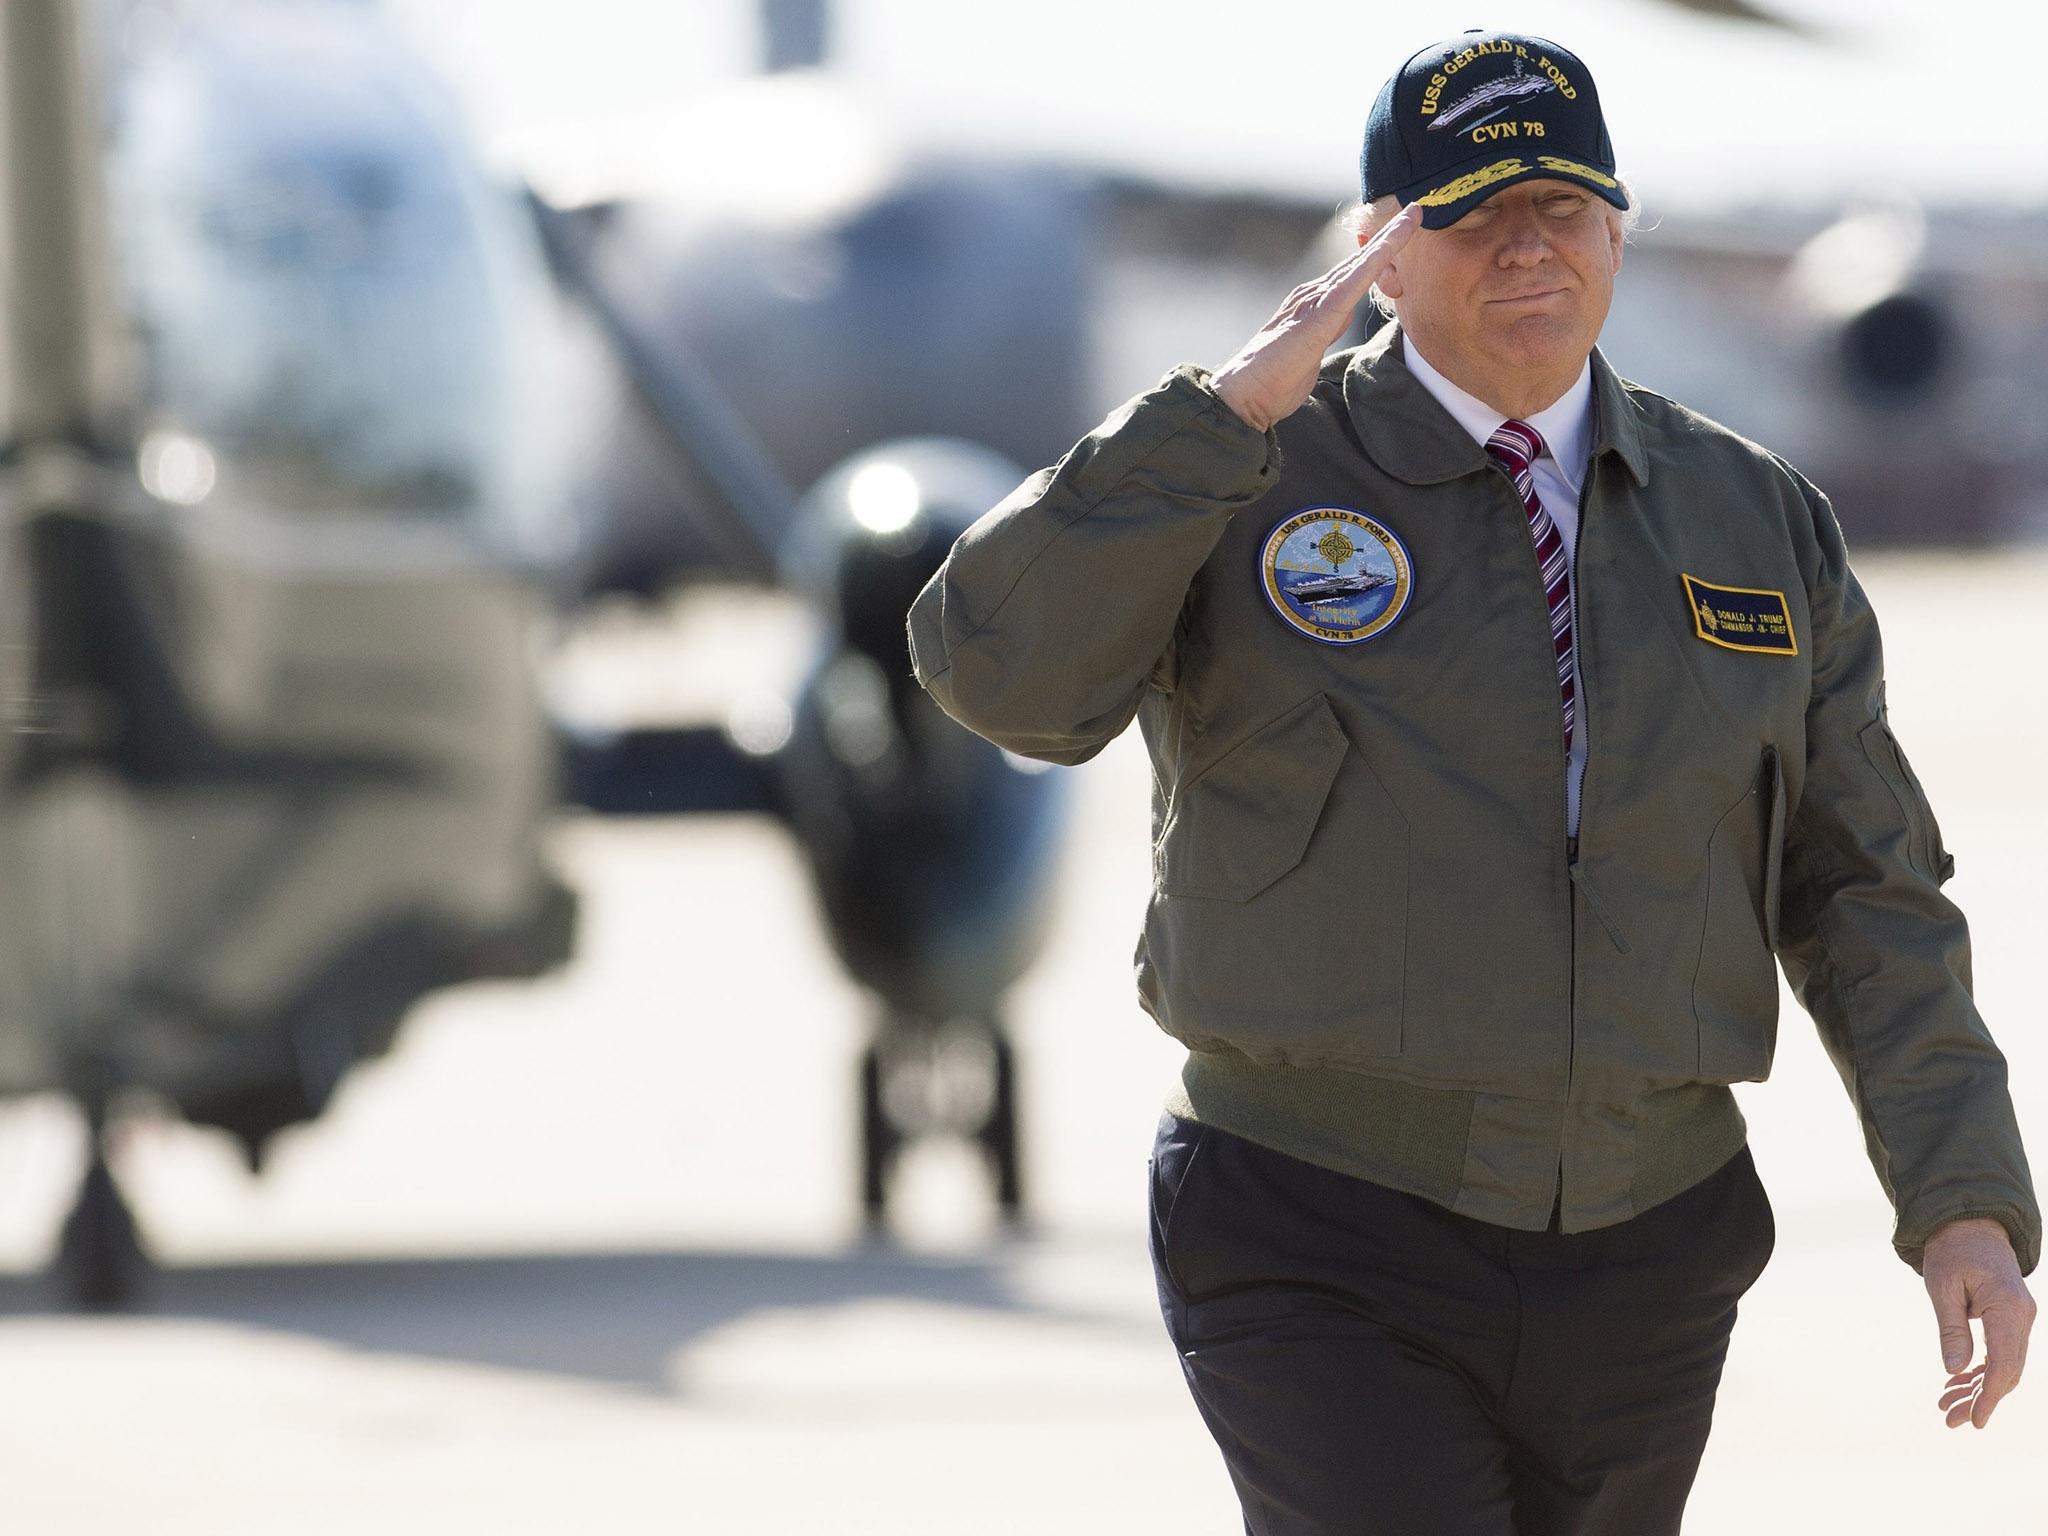 Mr Trump has often spoken about the need to look after America's forces veterans